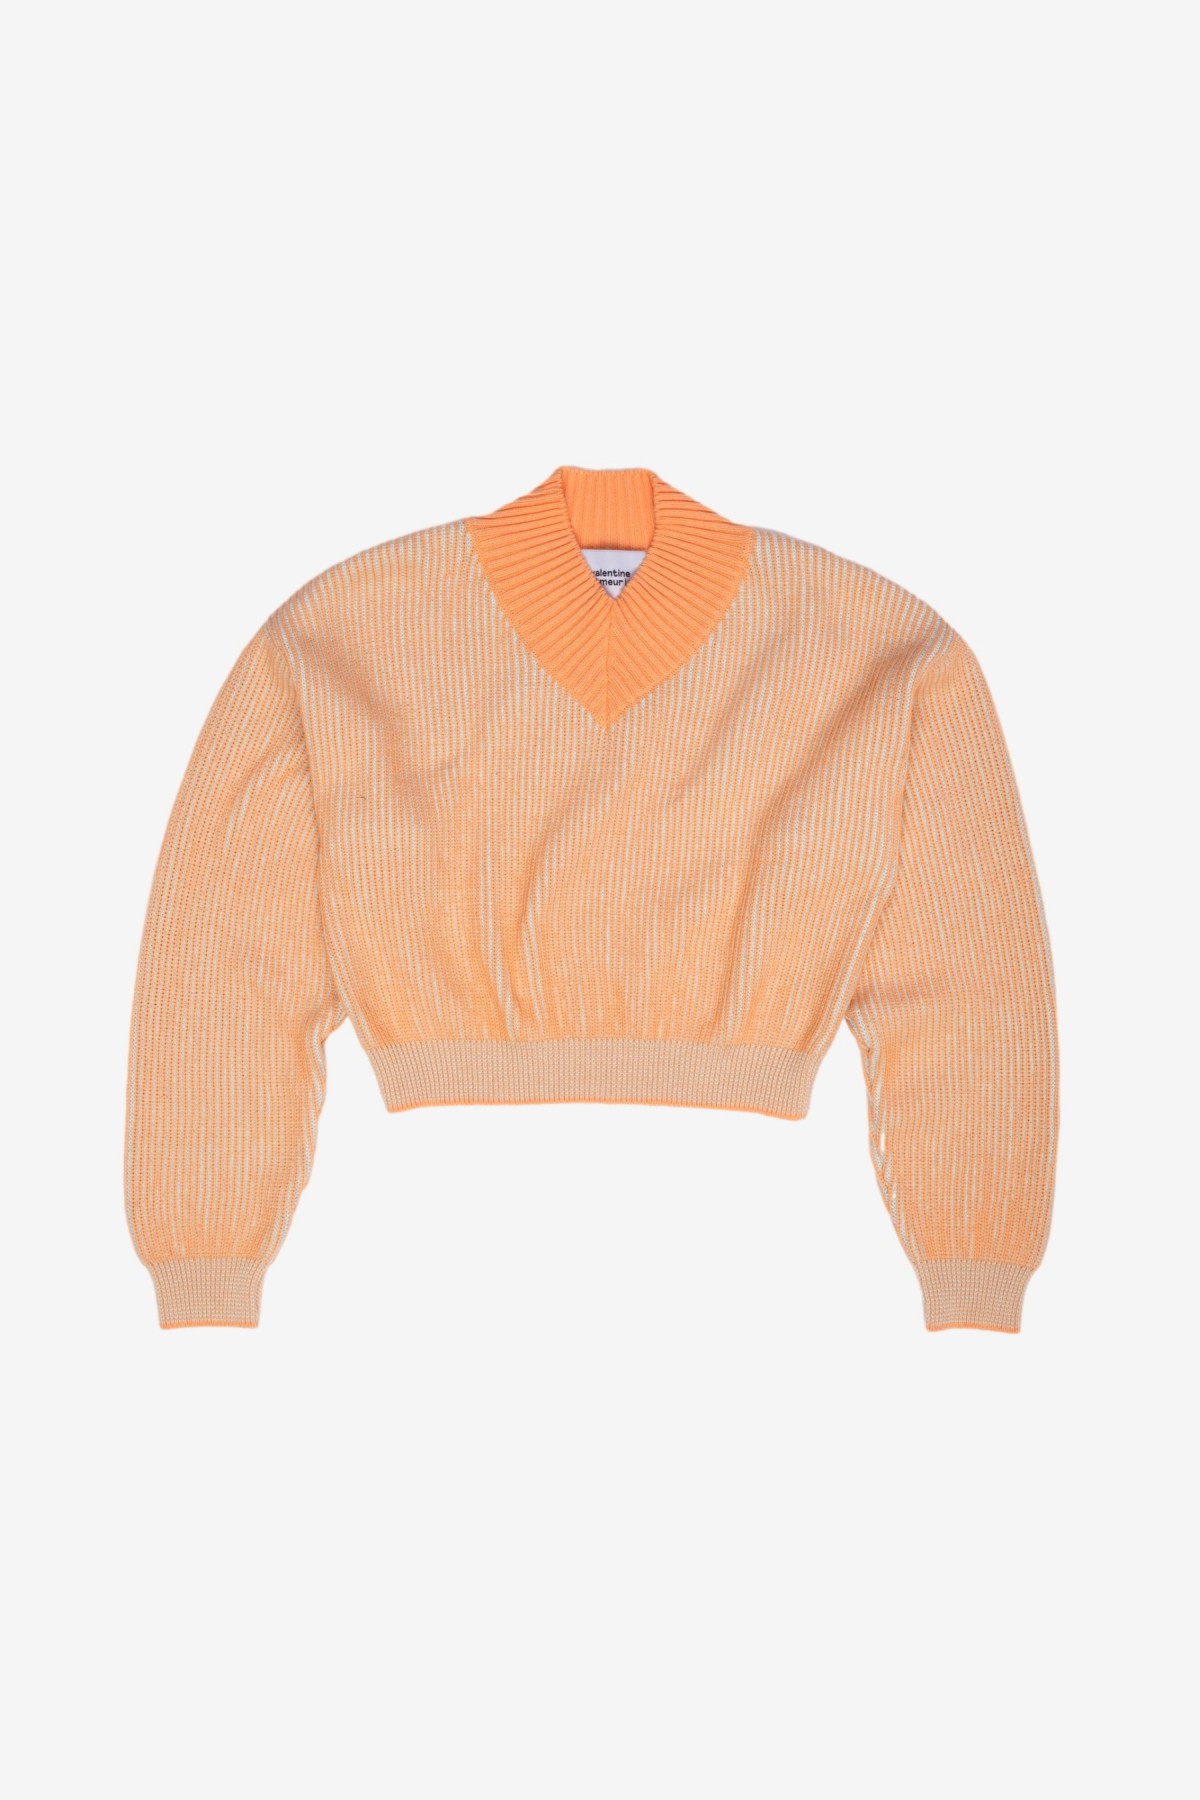 Valentine Witmeur Commercialist Ter Sweater in Salmon/Blue